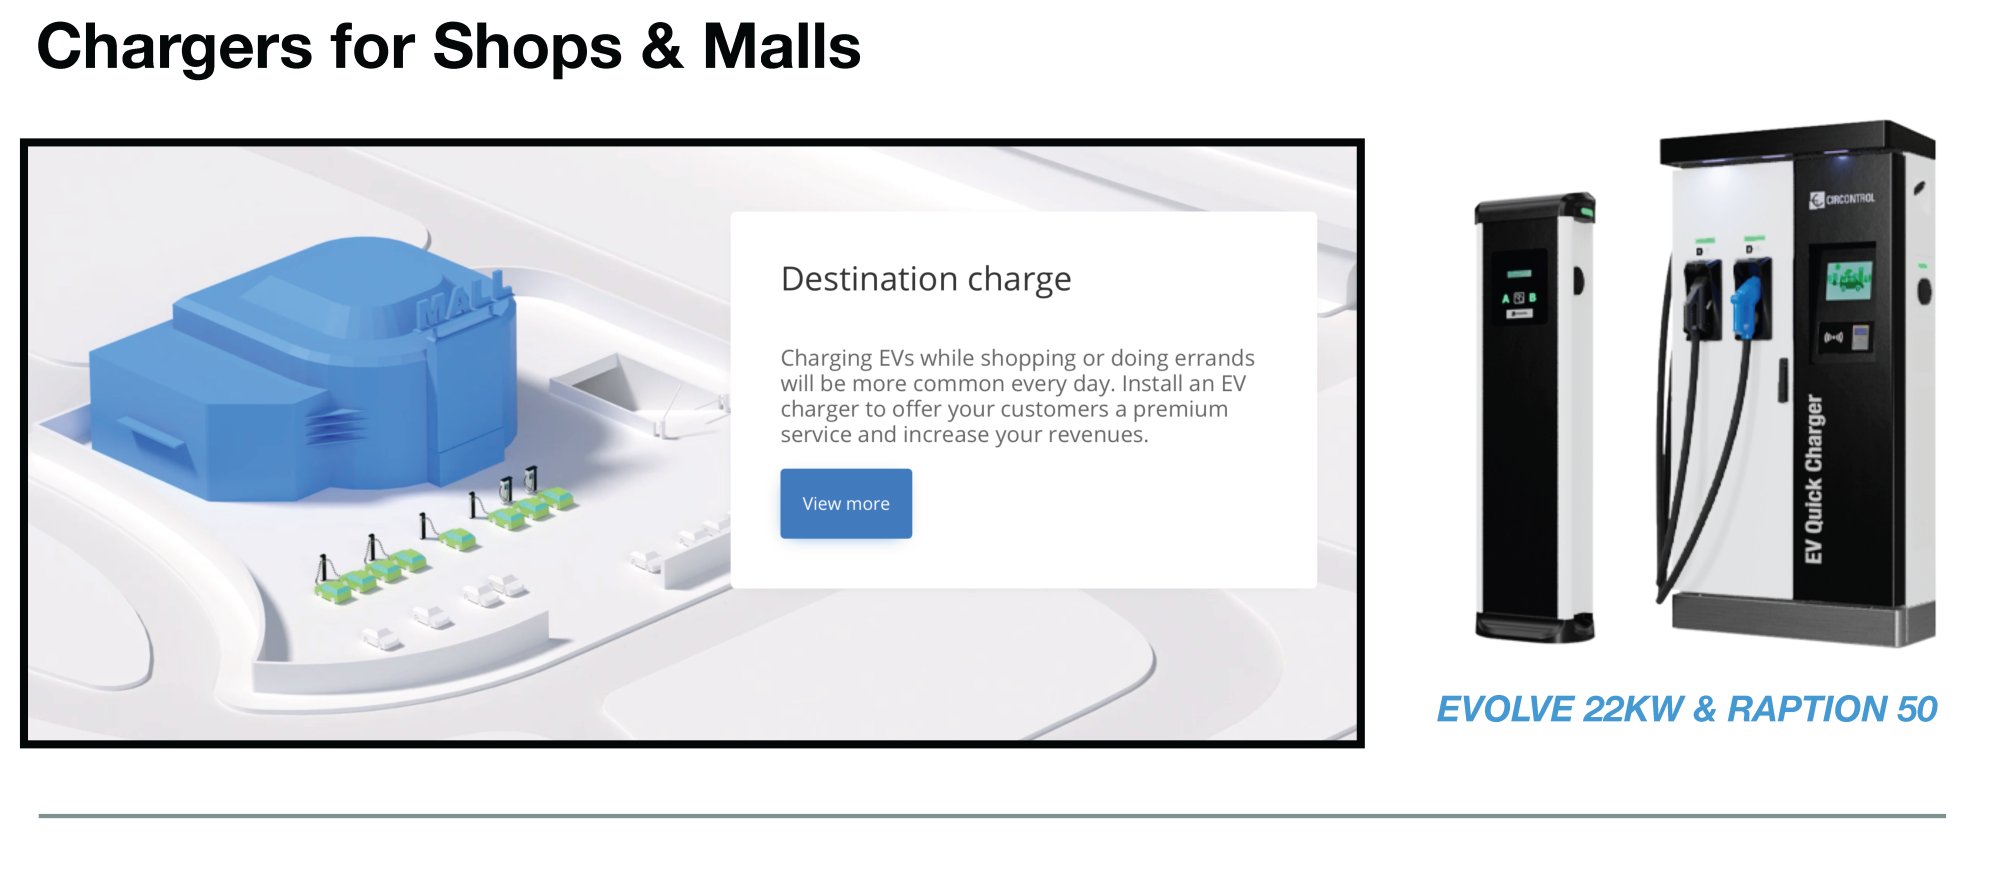 Chargers for shops & malls